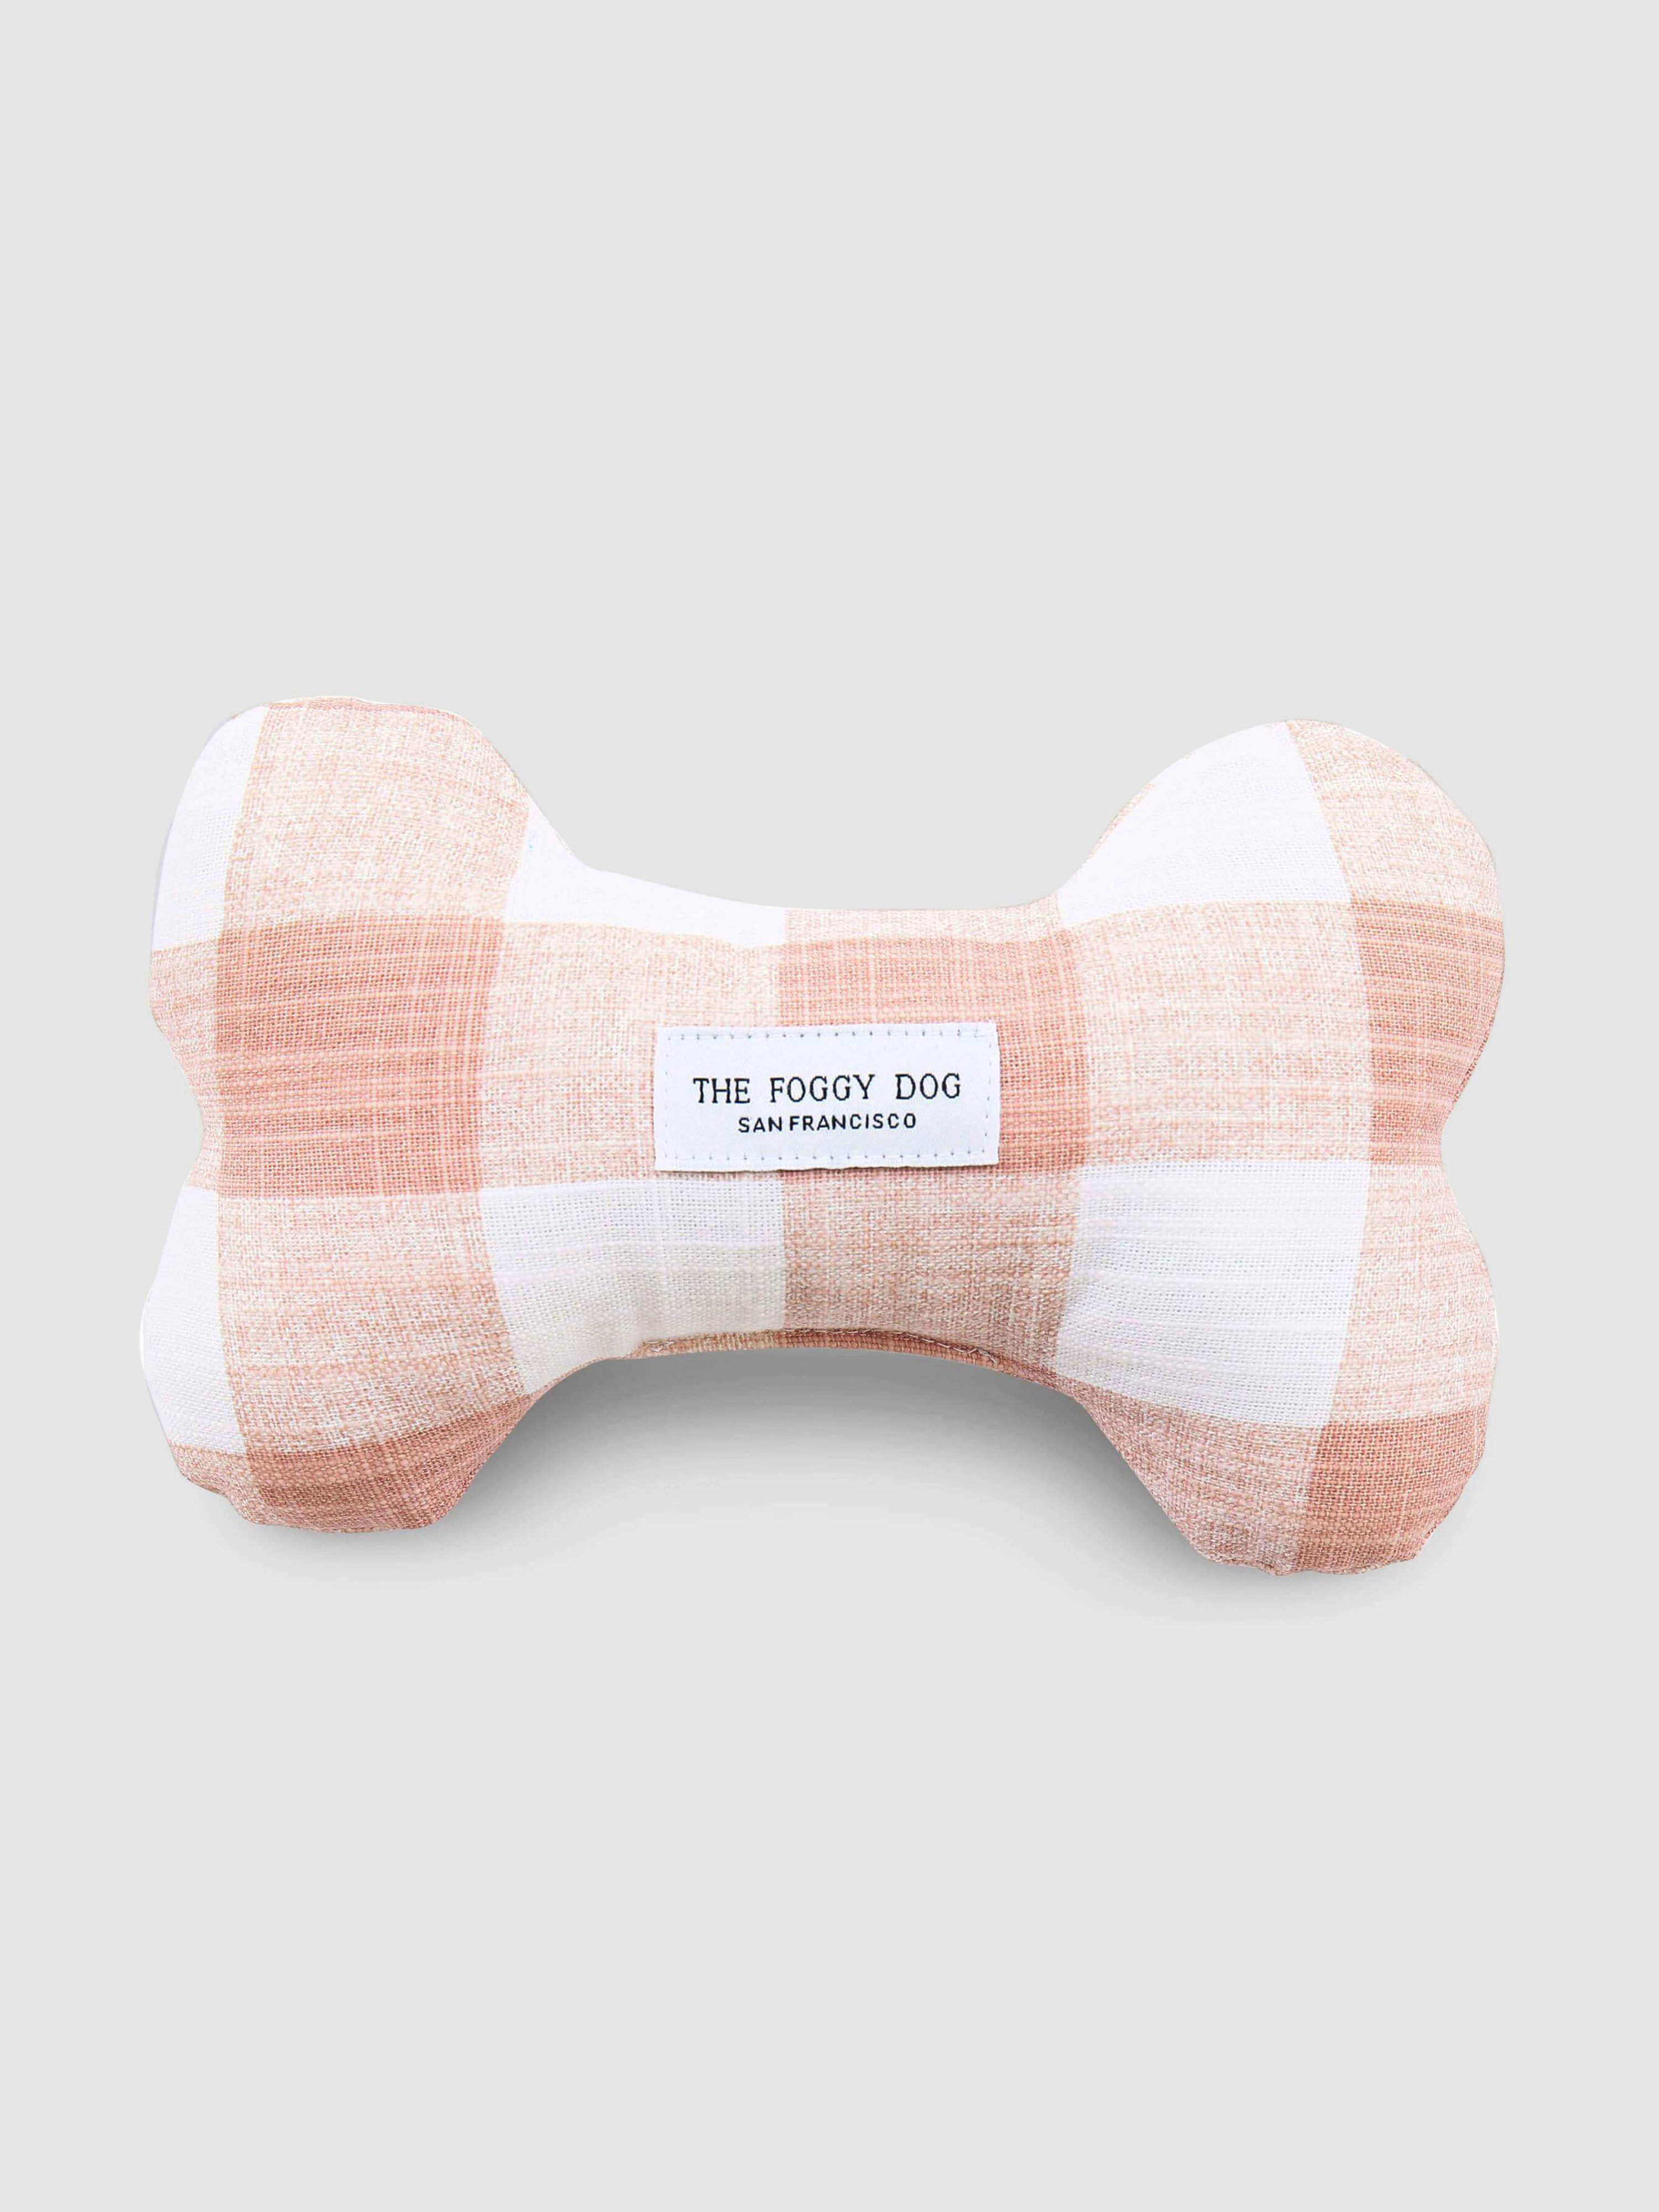 The Foggy Dog Blush Pink Gingham Dog Squeaky Toy